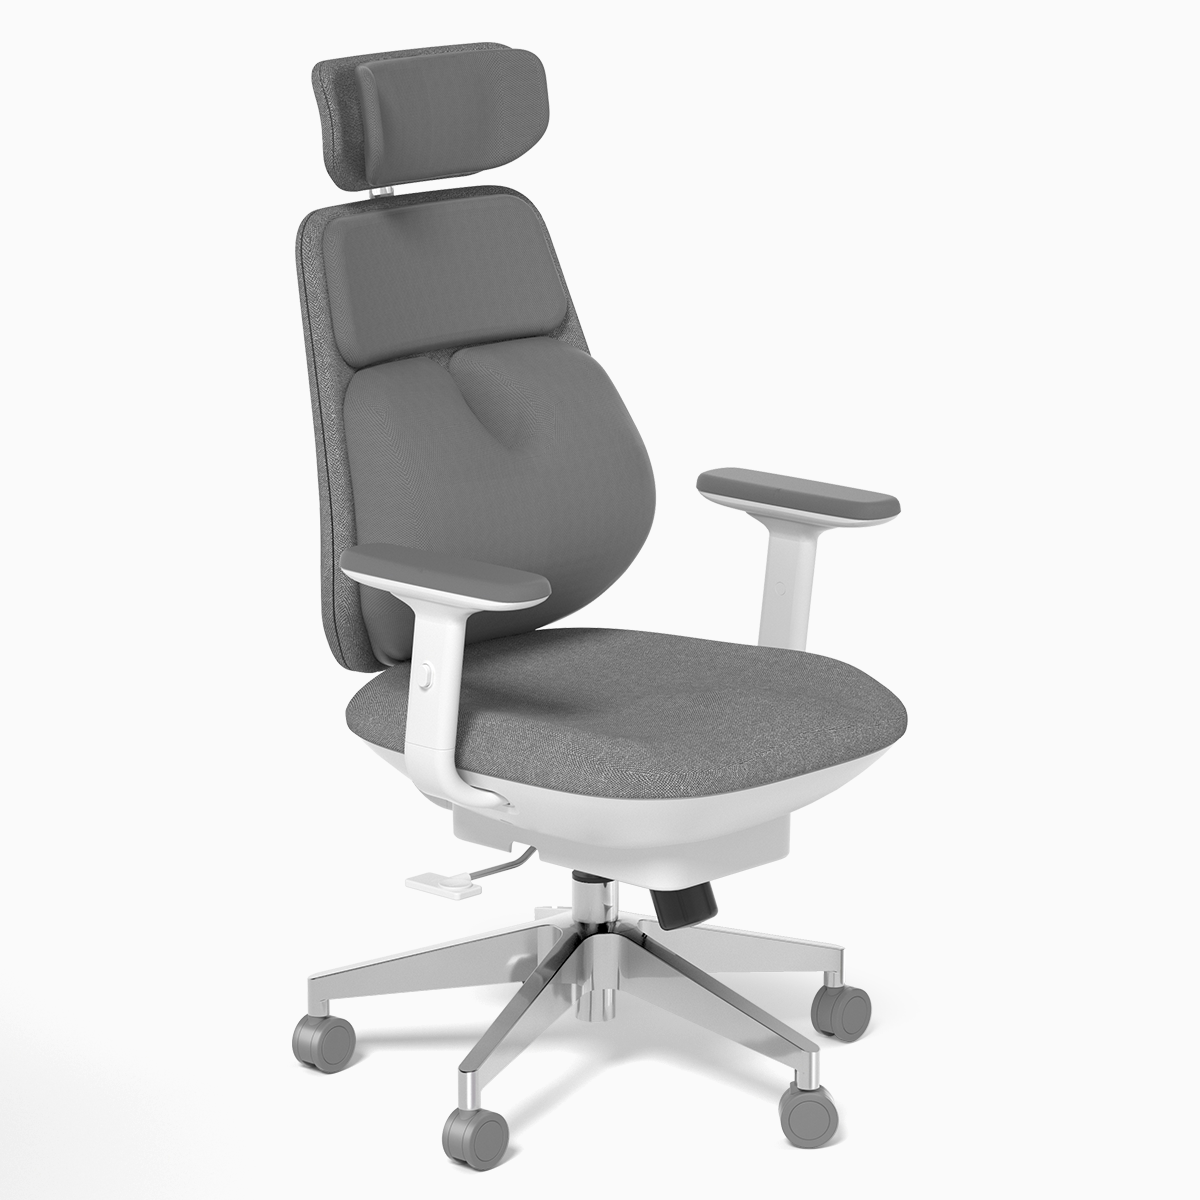 Backrobo_grey_Air_Smart_Chair_front_left_chamber_raised_view